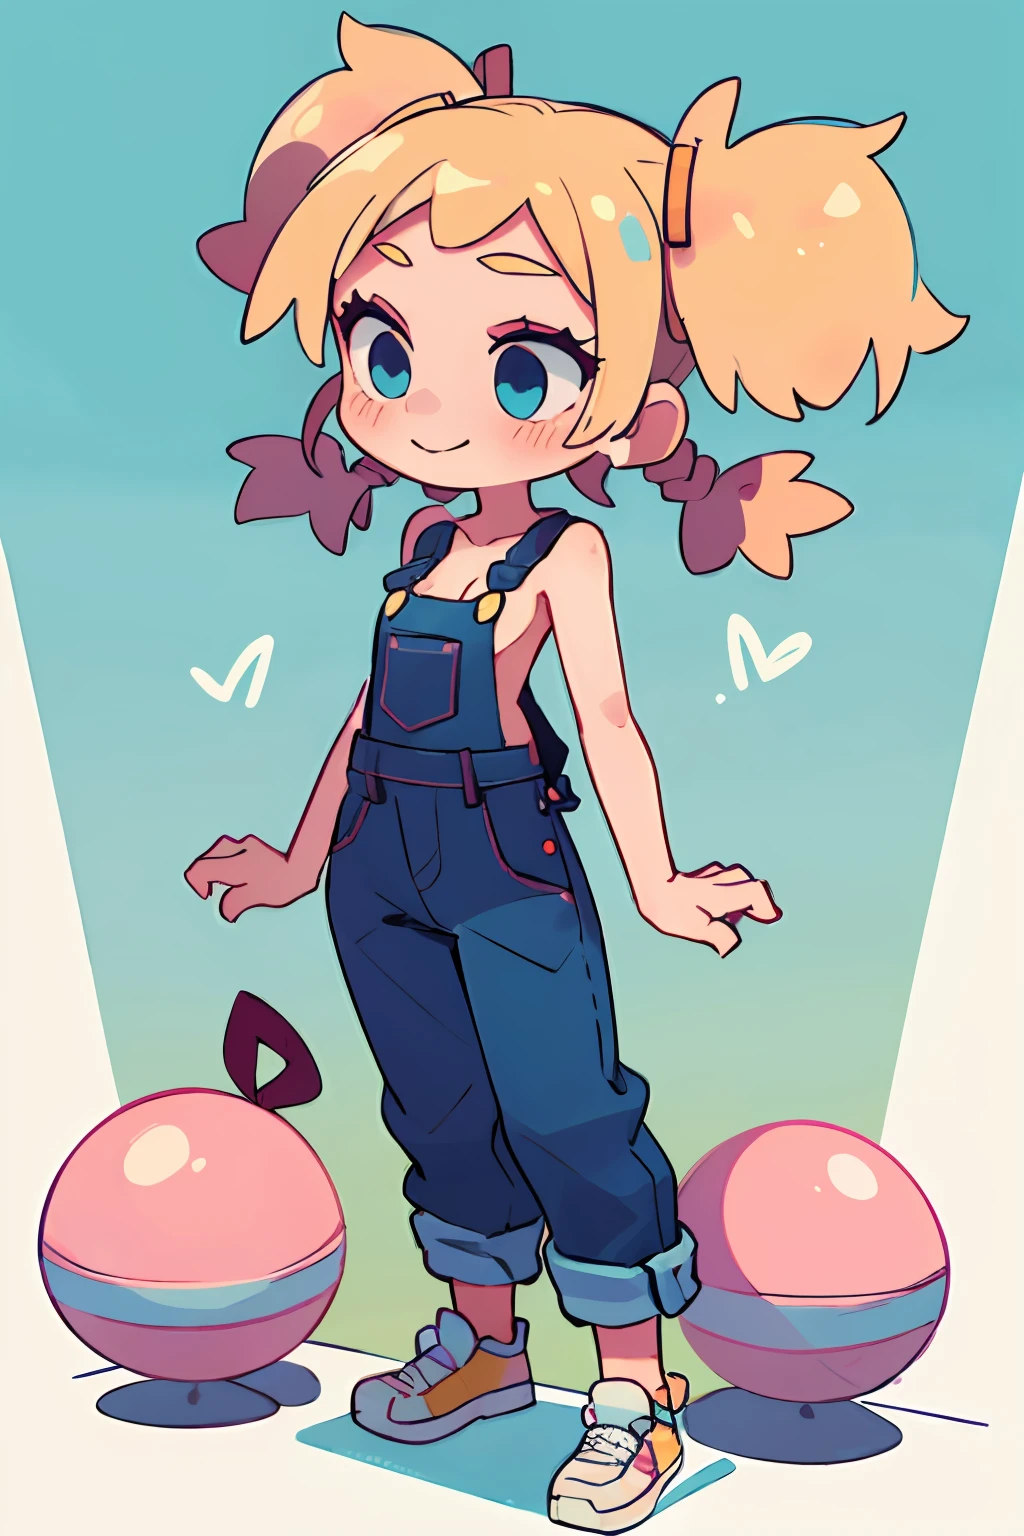 masterpiece, beautiful, 4k, detailed, intricate details, , , overalls, jean overalls, cuffed overalls, blonde hair, long blonde pigtails, hair ballies, pink hair tie balls, long flowing pigtails, soft blue eyes, soft smile, slight smile, hands back, standing on the balls of her feet, 1girl, rocking, shirtless, overalls over skin, bare shoulders, bare sleeves, bare arms, medium sized breasts, cleavage, cleavage behind overalls, facing forward, side cut, torso sohown